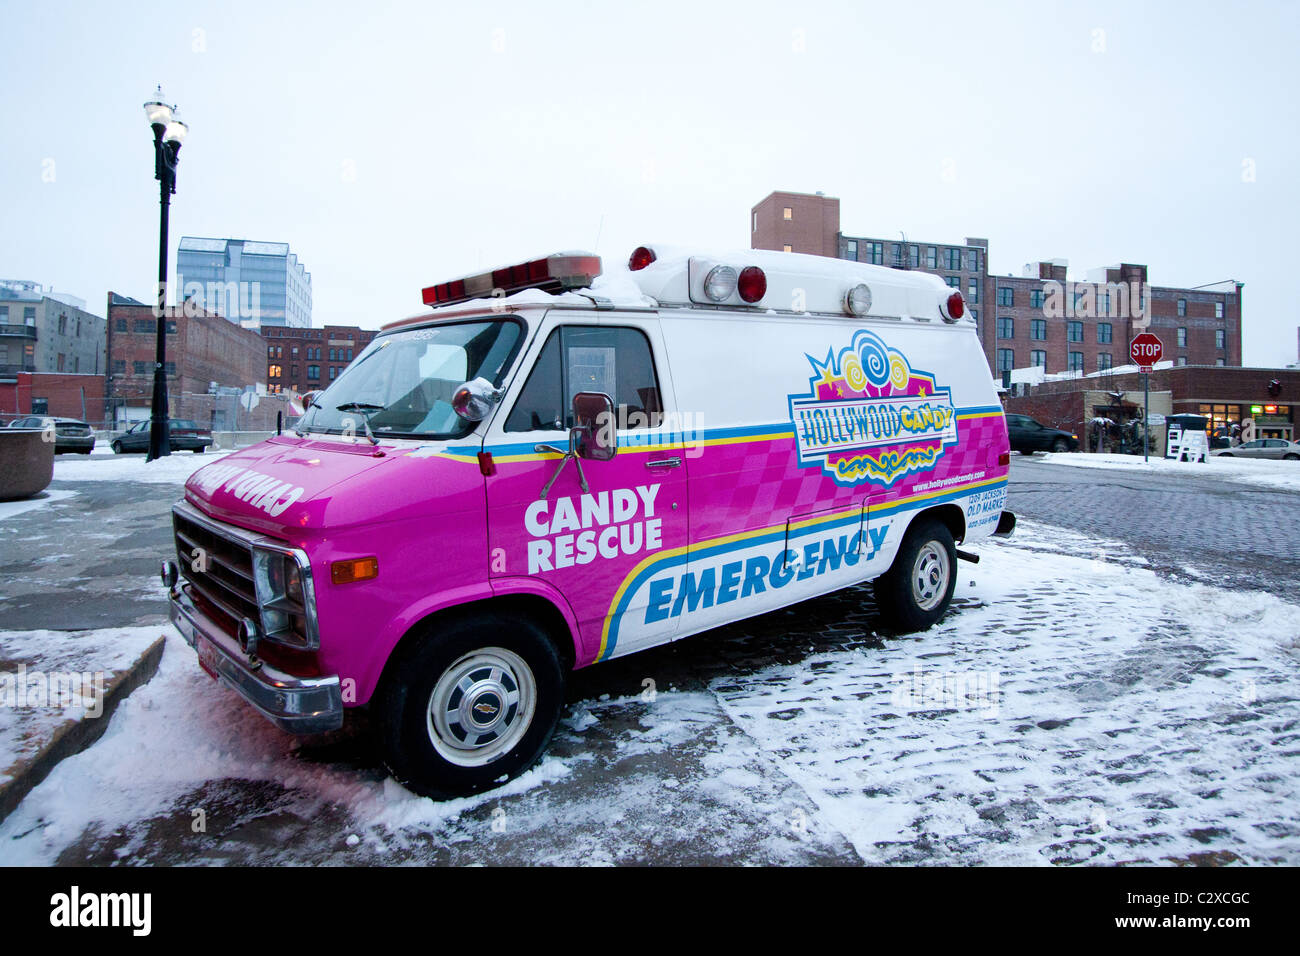 An ambulance converted into a candy truck. Stock Photo